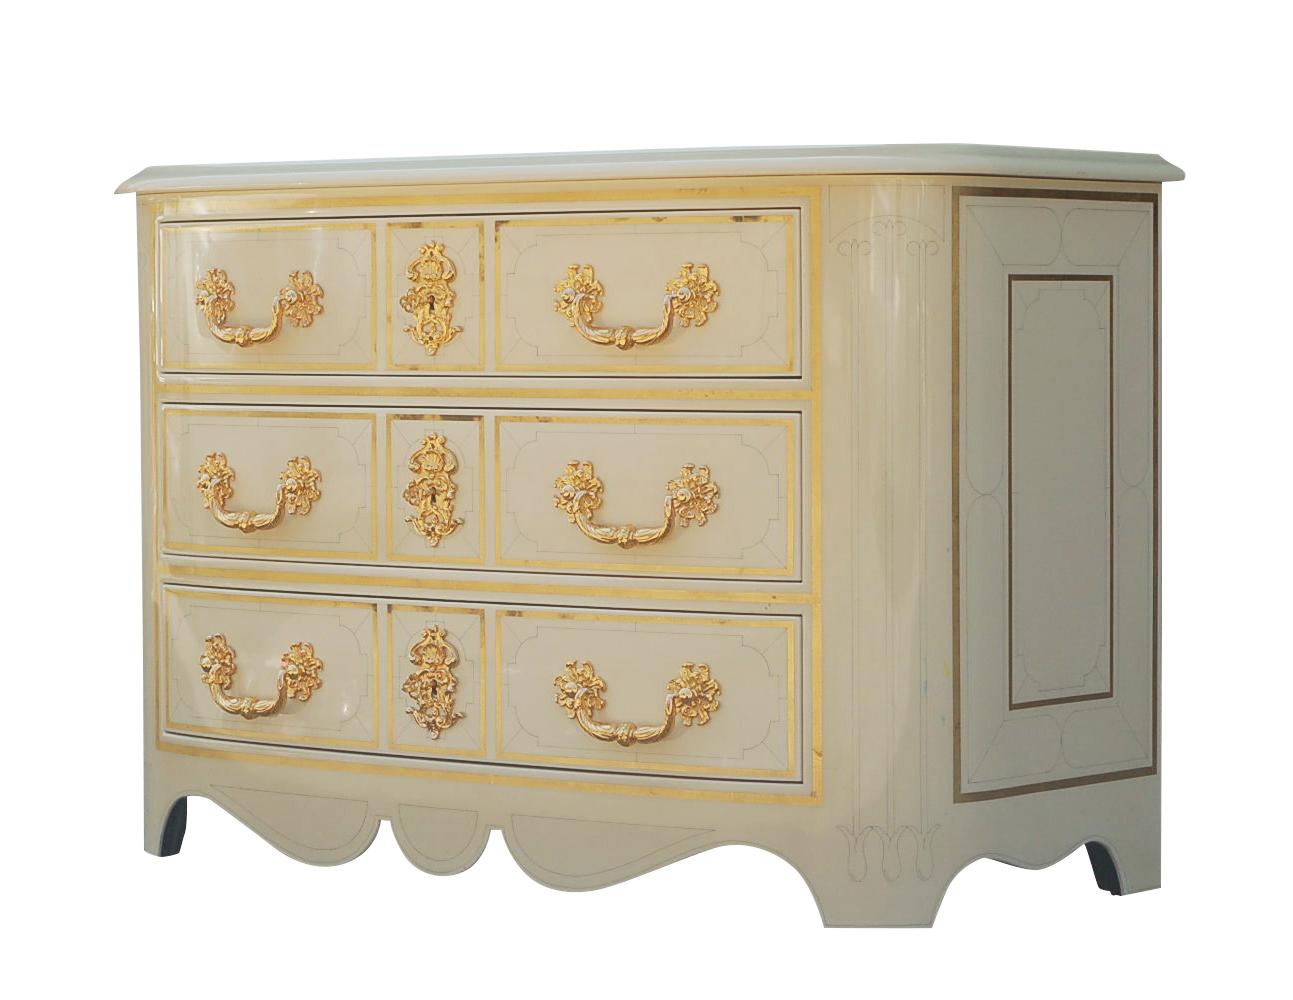 Matching Pair of Italian Ivory White Lacquer Commodes or Chests with Gold Leaf 6